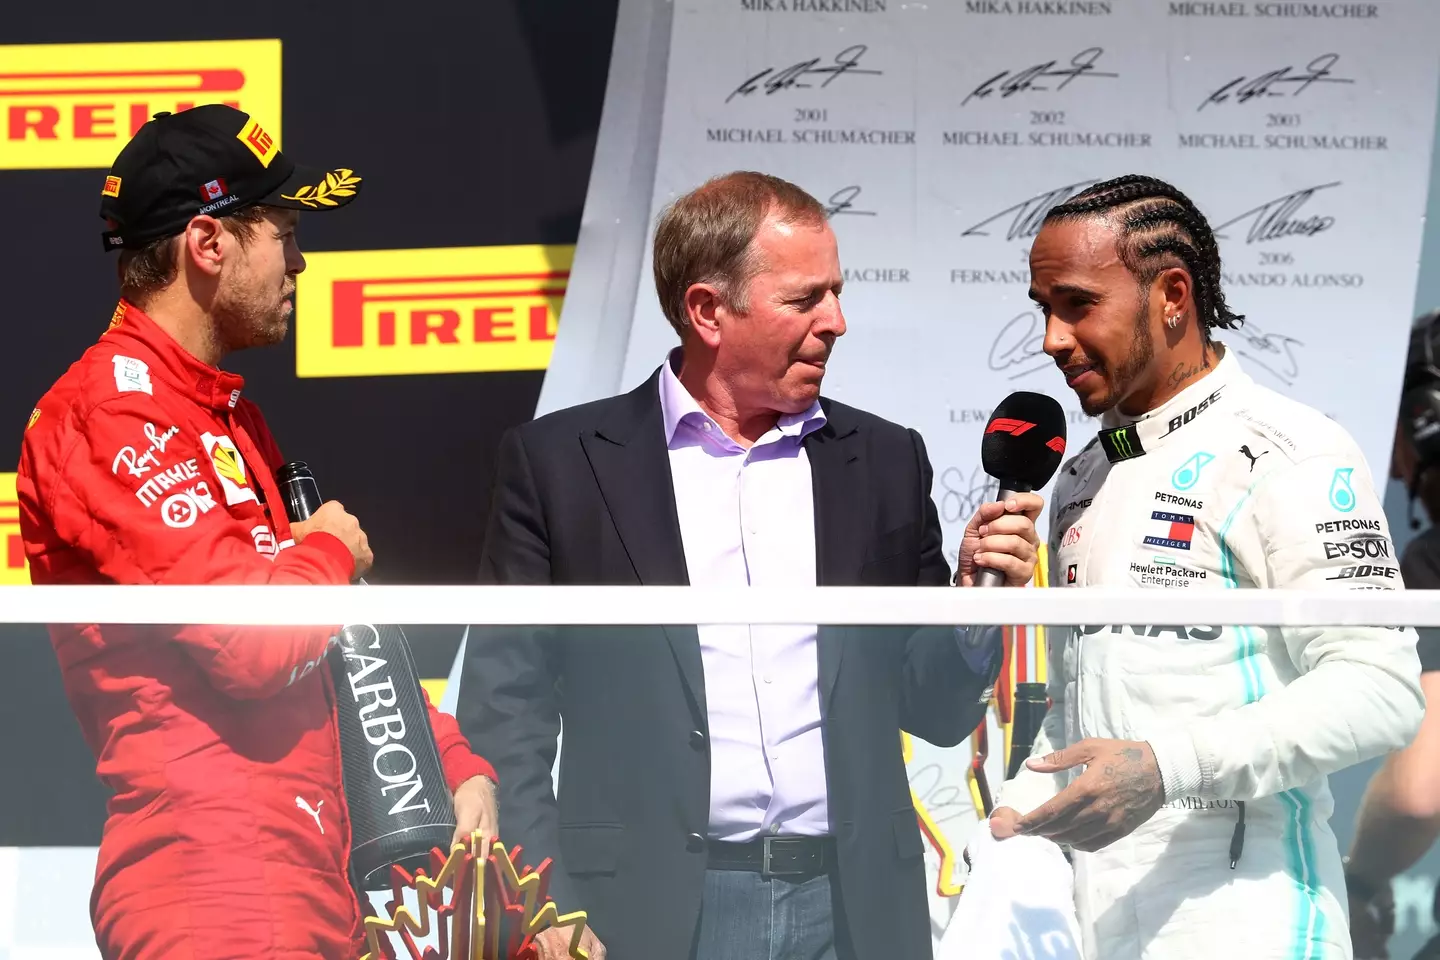 We're going to have to get used to seeing Lewis Hamilton in the red racing jumpsuit of Ferrari.